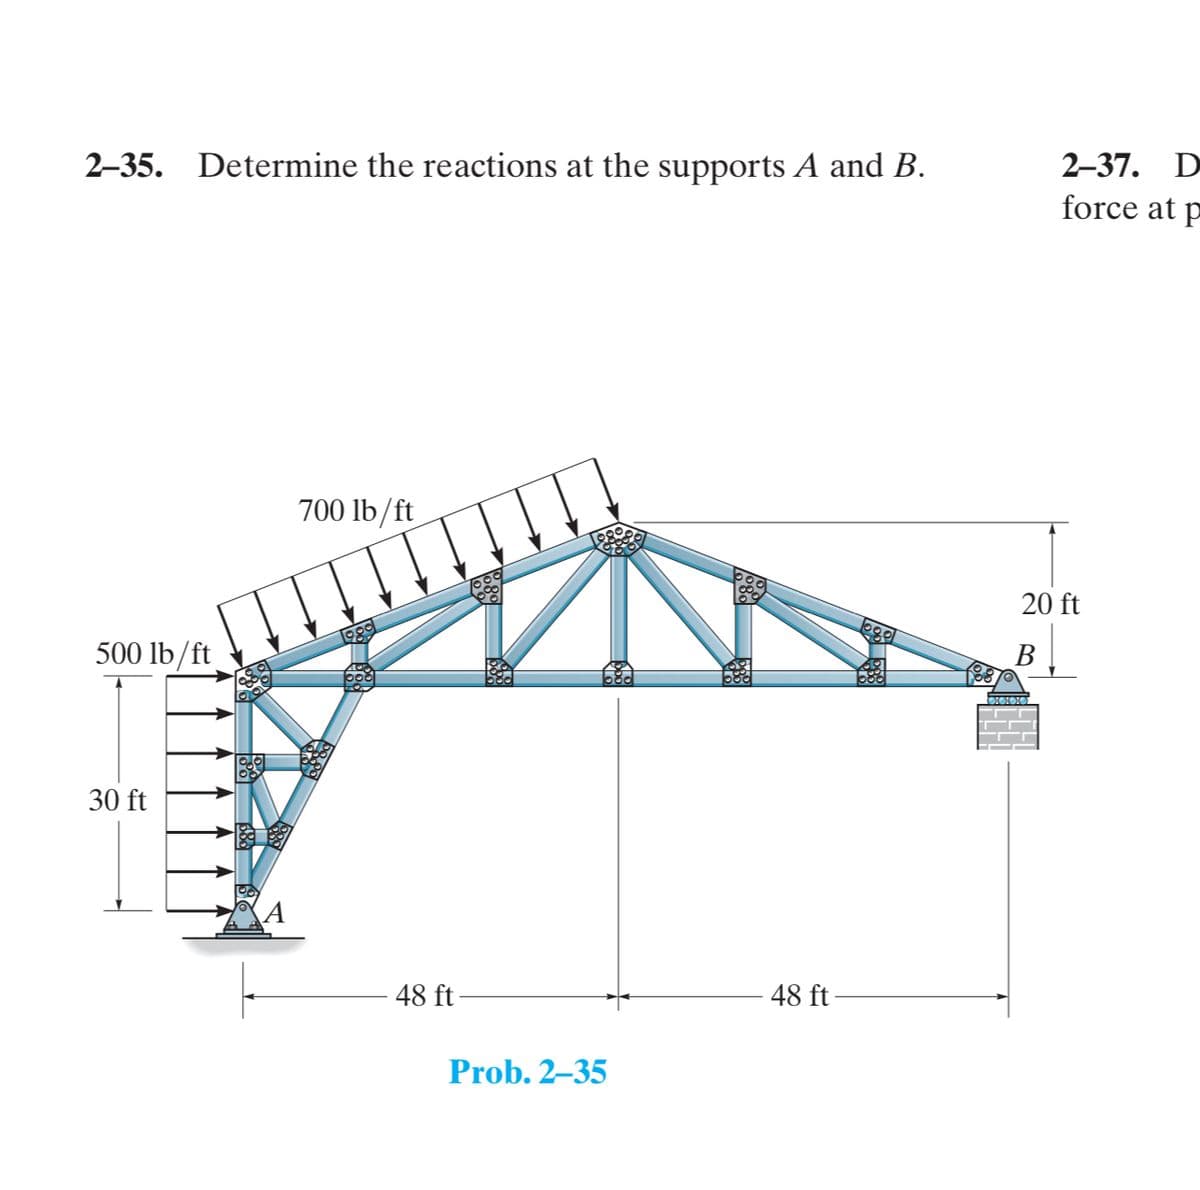 2-35. Determine the reactions at the supports A and B.
500 lb/ft
30 ft
700 lb/ft
48 ft
Prob. 2-35
-48 ft
boo
20 ft
B
2-37. D
force at p
0000